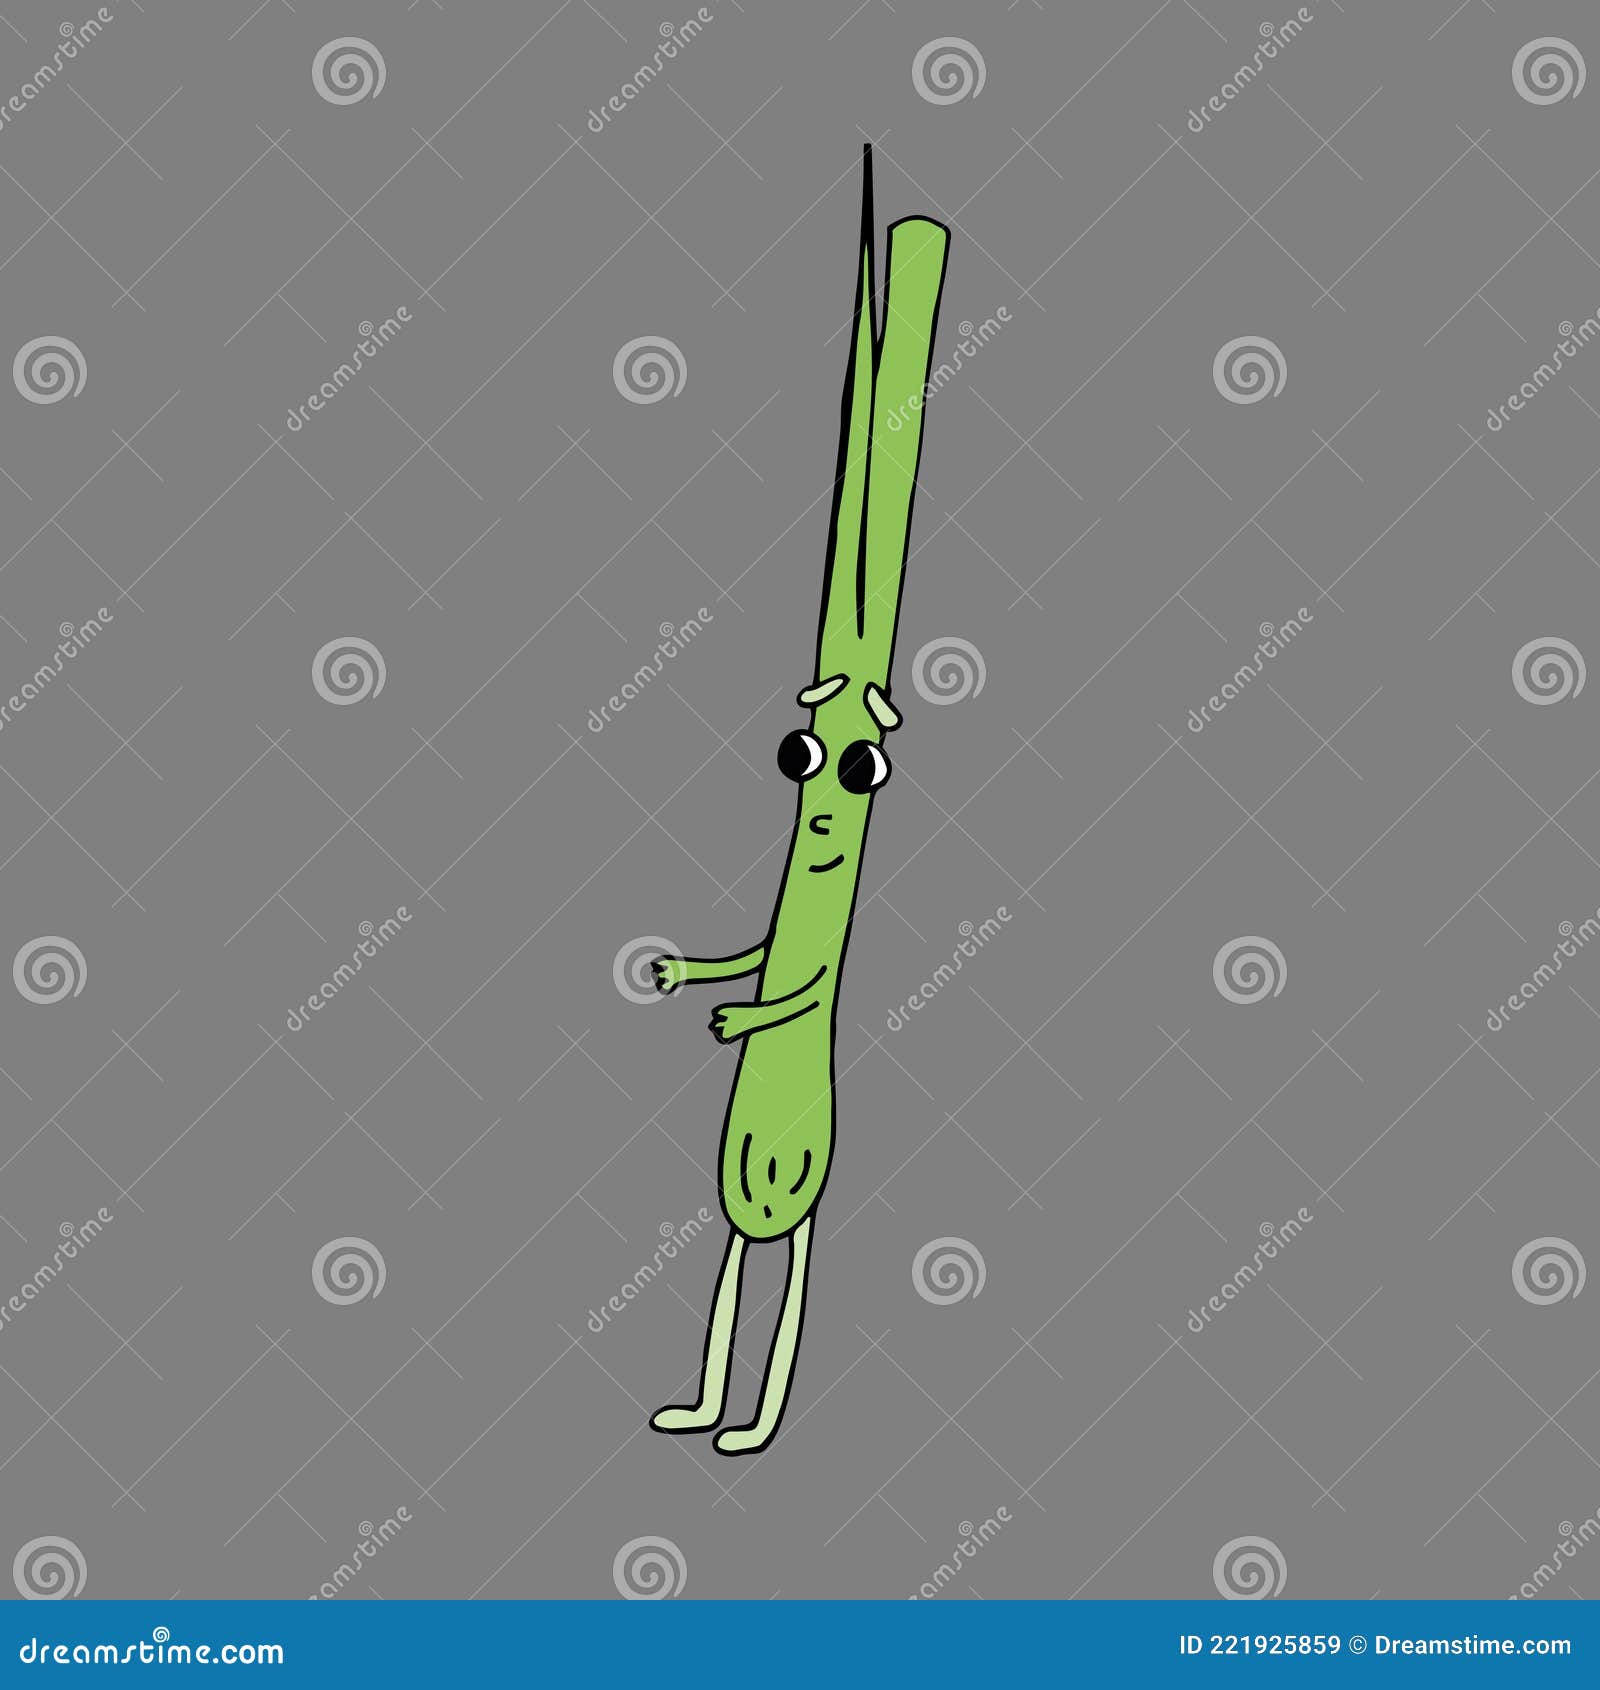 Funny Cartoon Character Green Chives. Vegetables and Fruits. Vector ...